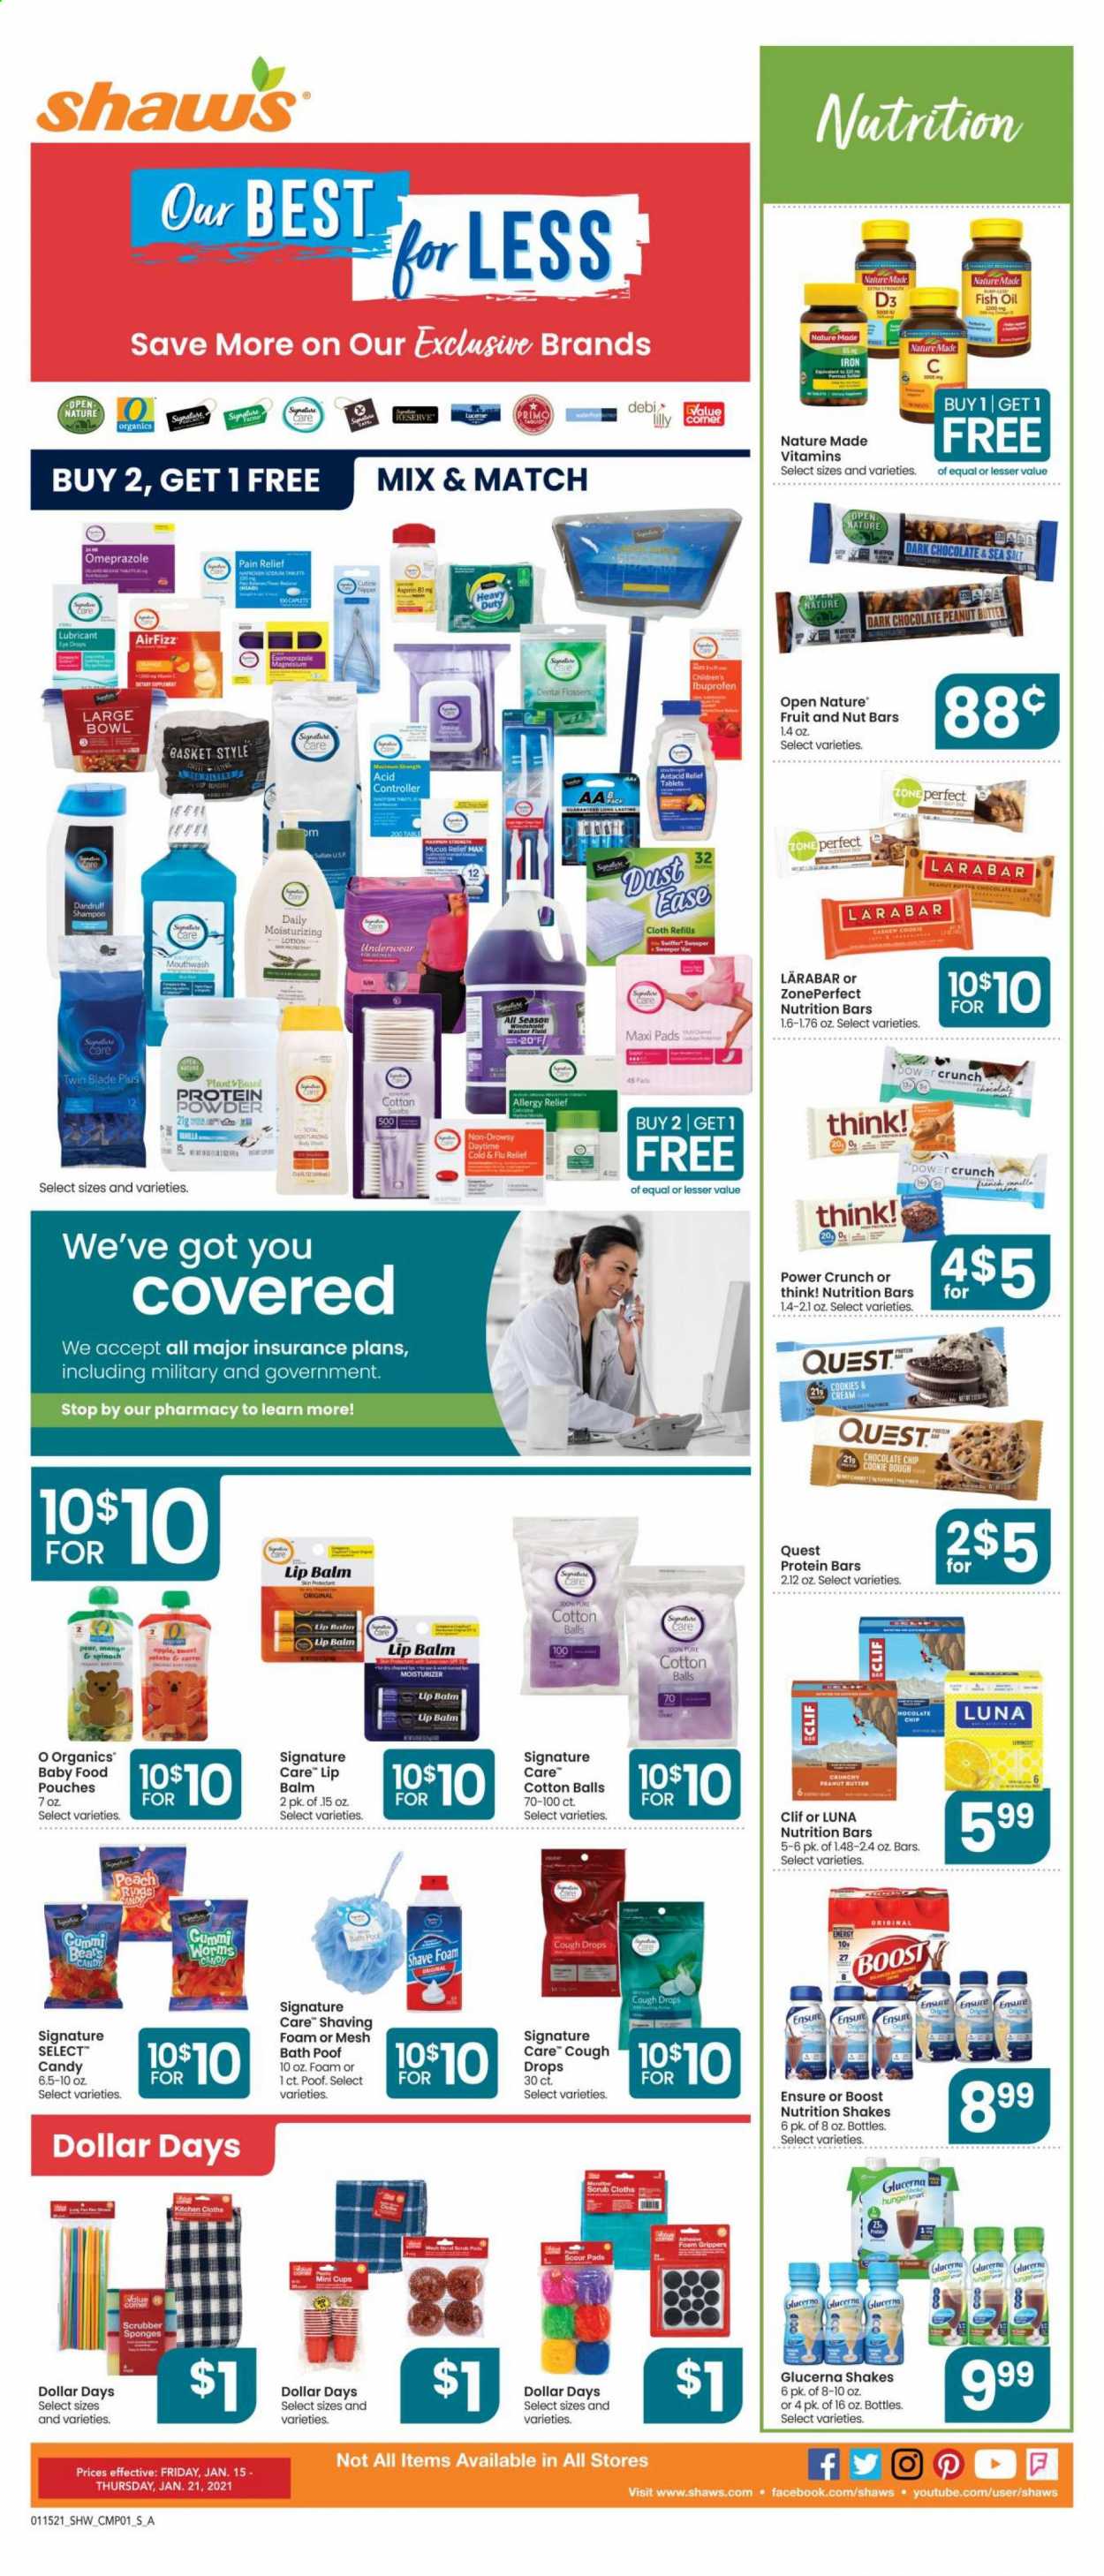 thumbnail - Shaw’s Flyer - 01/15/2021 - 01/21/2021 - Sales products - pears, shake, cookies, dark chocolate, sea salt, nutrition bar, protein bar, nut bar, Zone Perfect, fish oil, peanut butter, cashews, Boost, cotton balls, shampoo, sanitary pads, lip balm, moisturizer, body lotion, shaving foam, basket, sponge, cup, lubricant, Cold & Flu, magnesium, Nature Made, Ibuprofen, pain relief, Glucerna, eye drops, whey protein, Antacid, vitamin D3, cough drops, aspirin, allergy relief. Page 5.